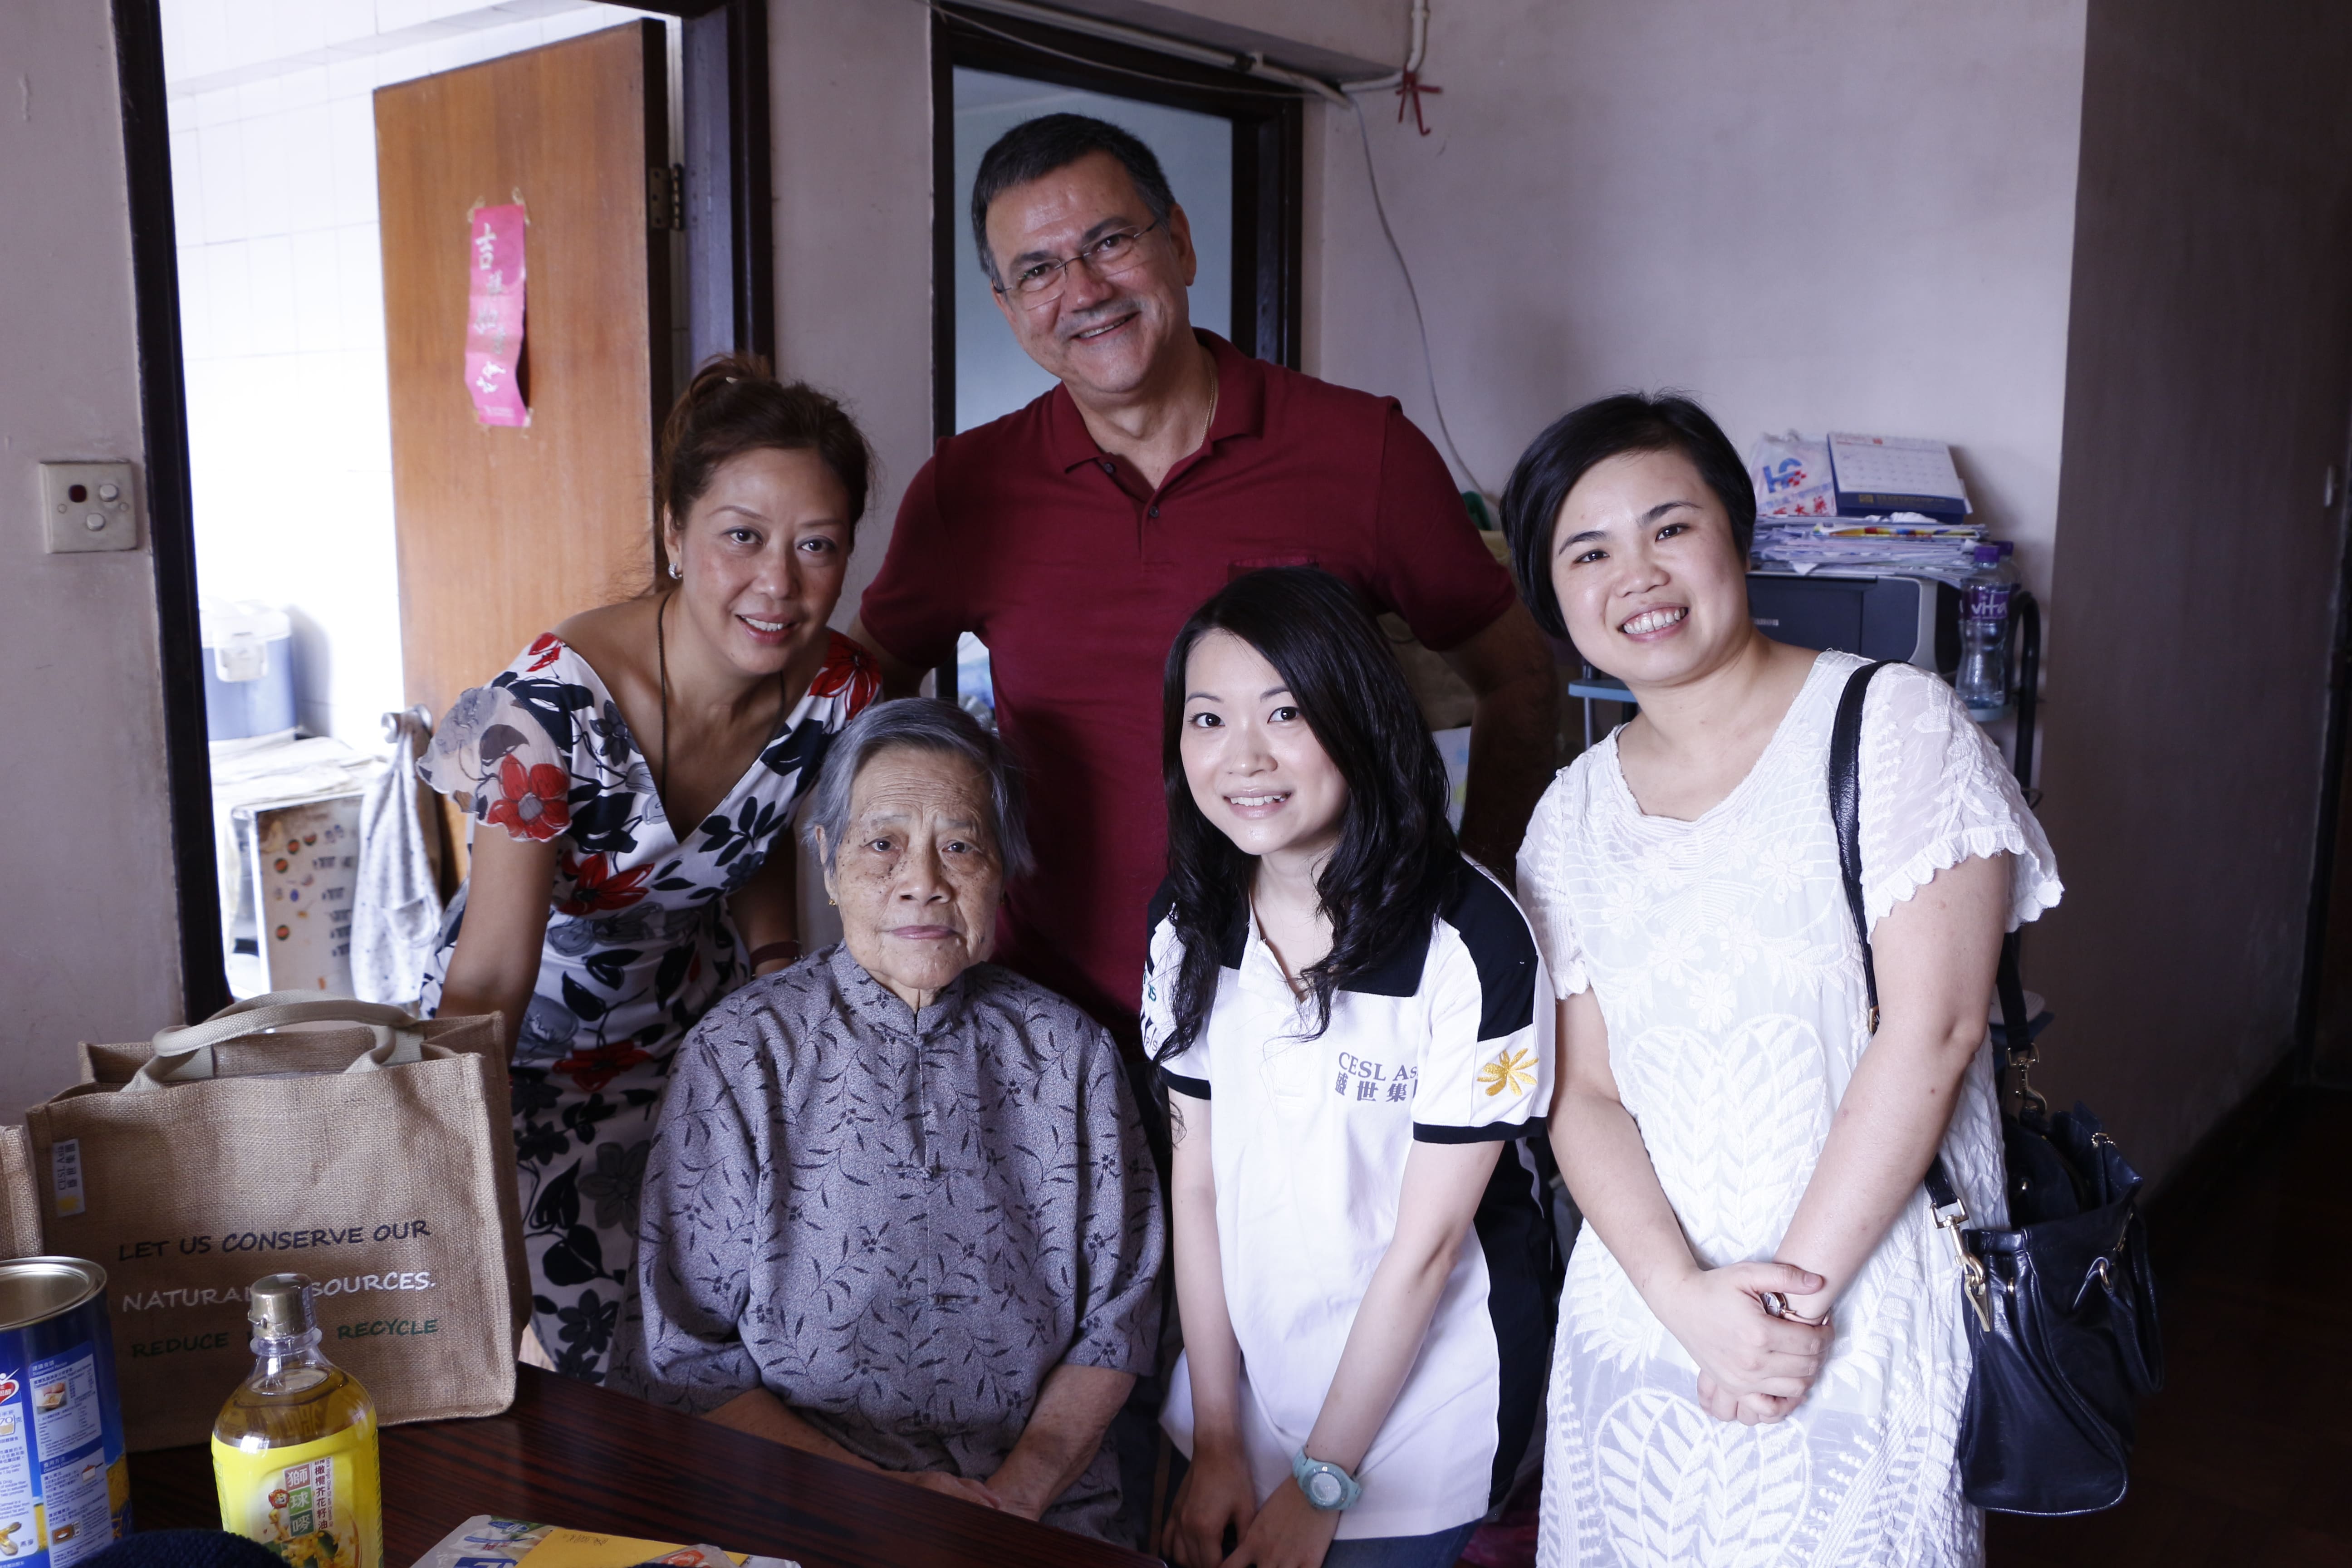 Volunteer Group from CESL Asia Visits “Peng On Tung” Tele-Assistance Service Users